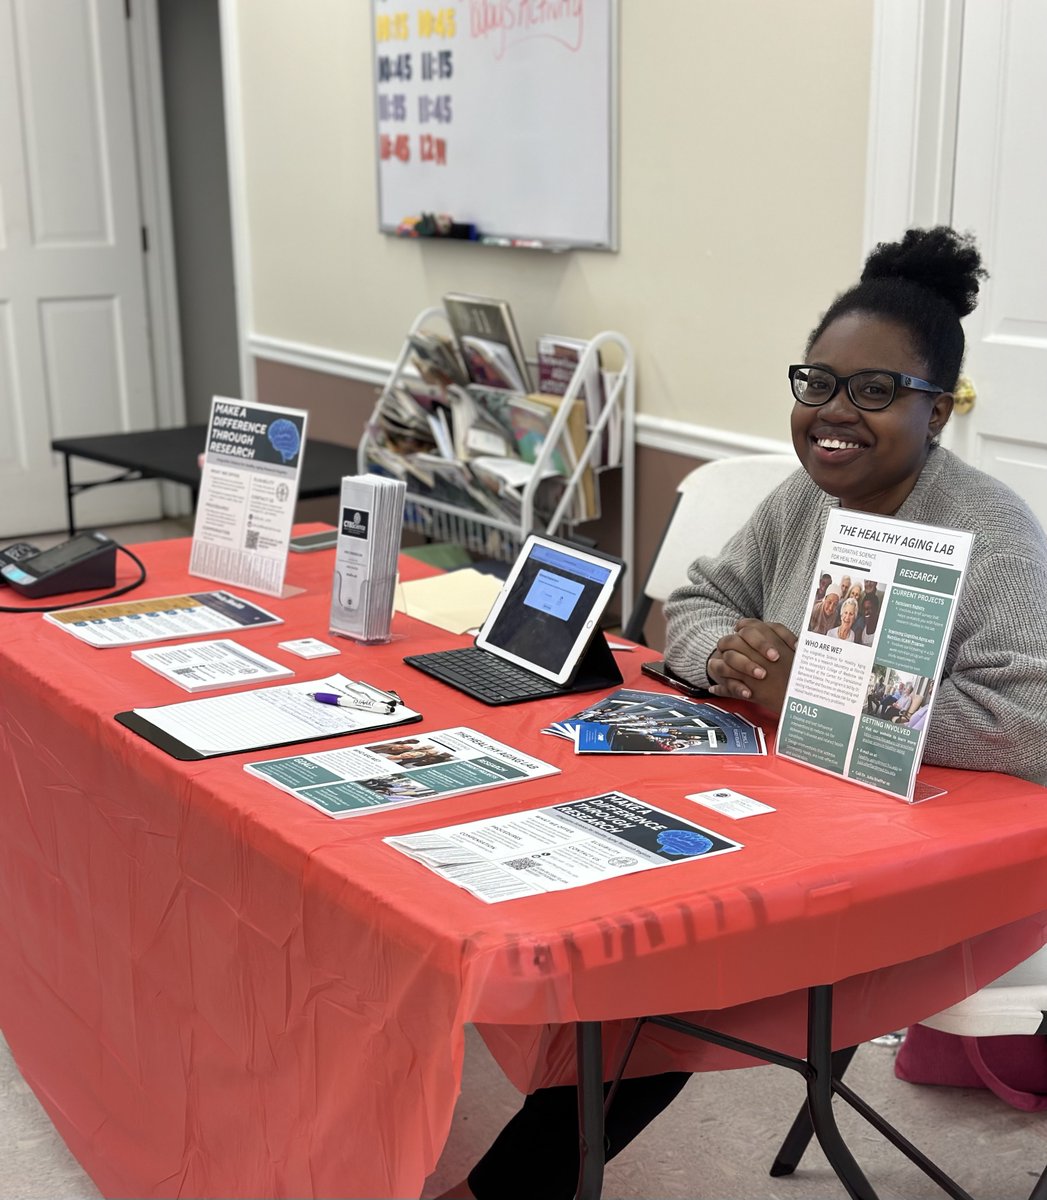 Biological risks for dementia can be reduced by improving diet. Dr. Julia Sheffler shared about this and her research at the Gadsden Senior Center. Naomi Frederic also attended to assist with recruitment efforts and sharing about the Integrative Science for Healthy Aging program.